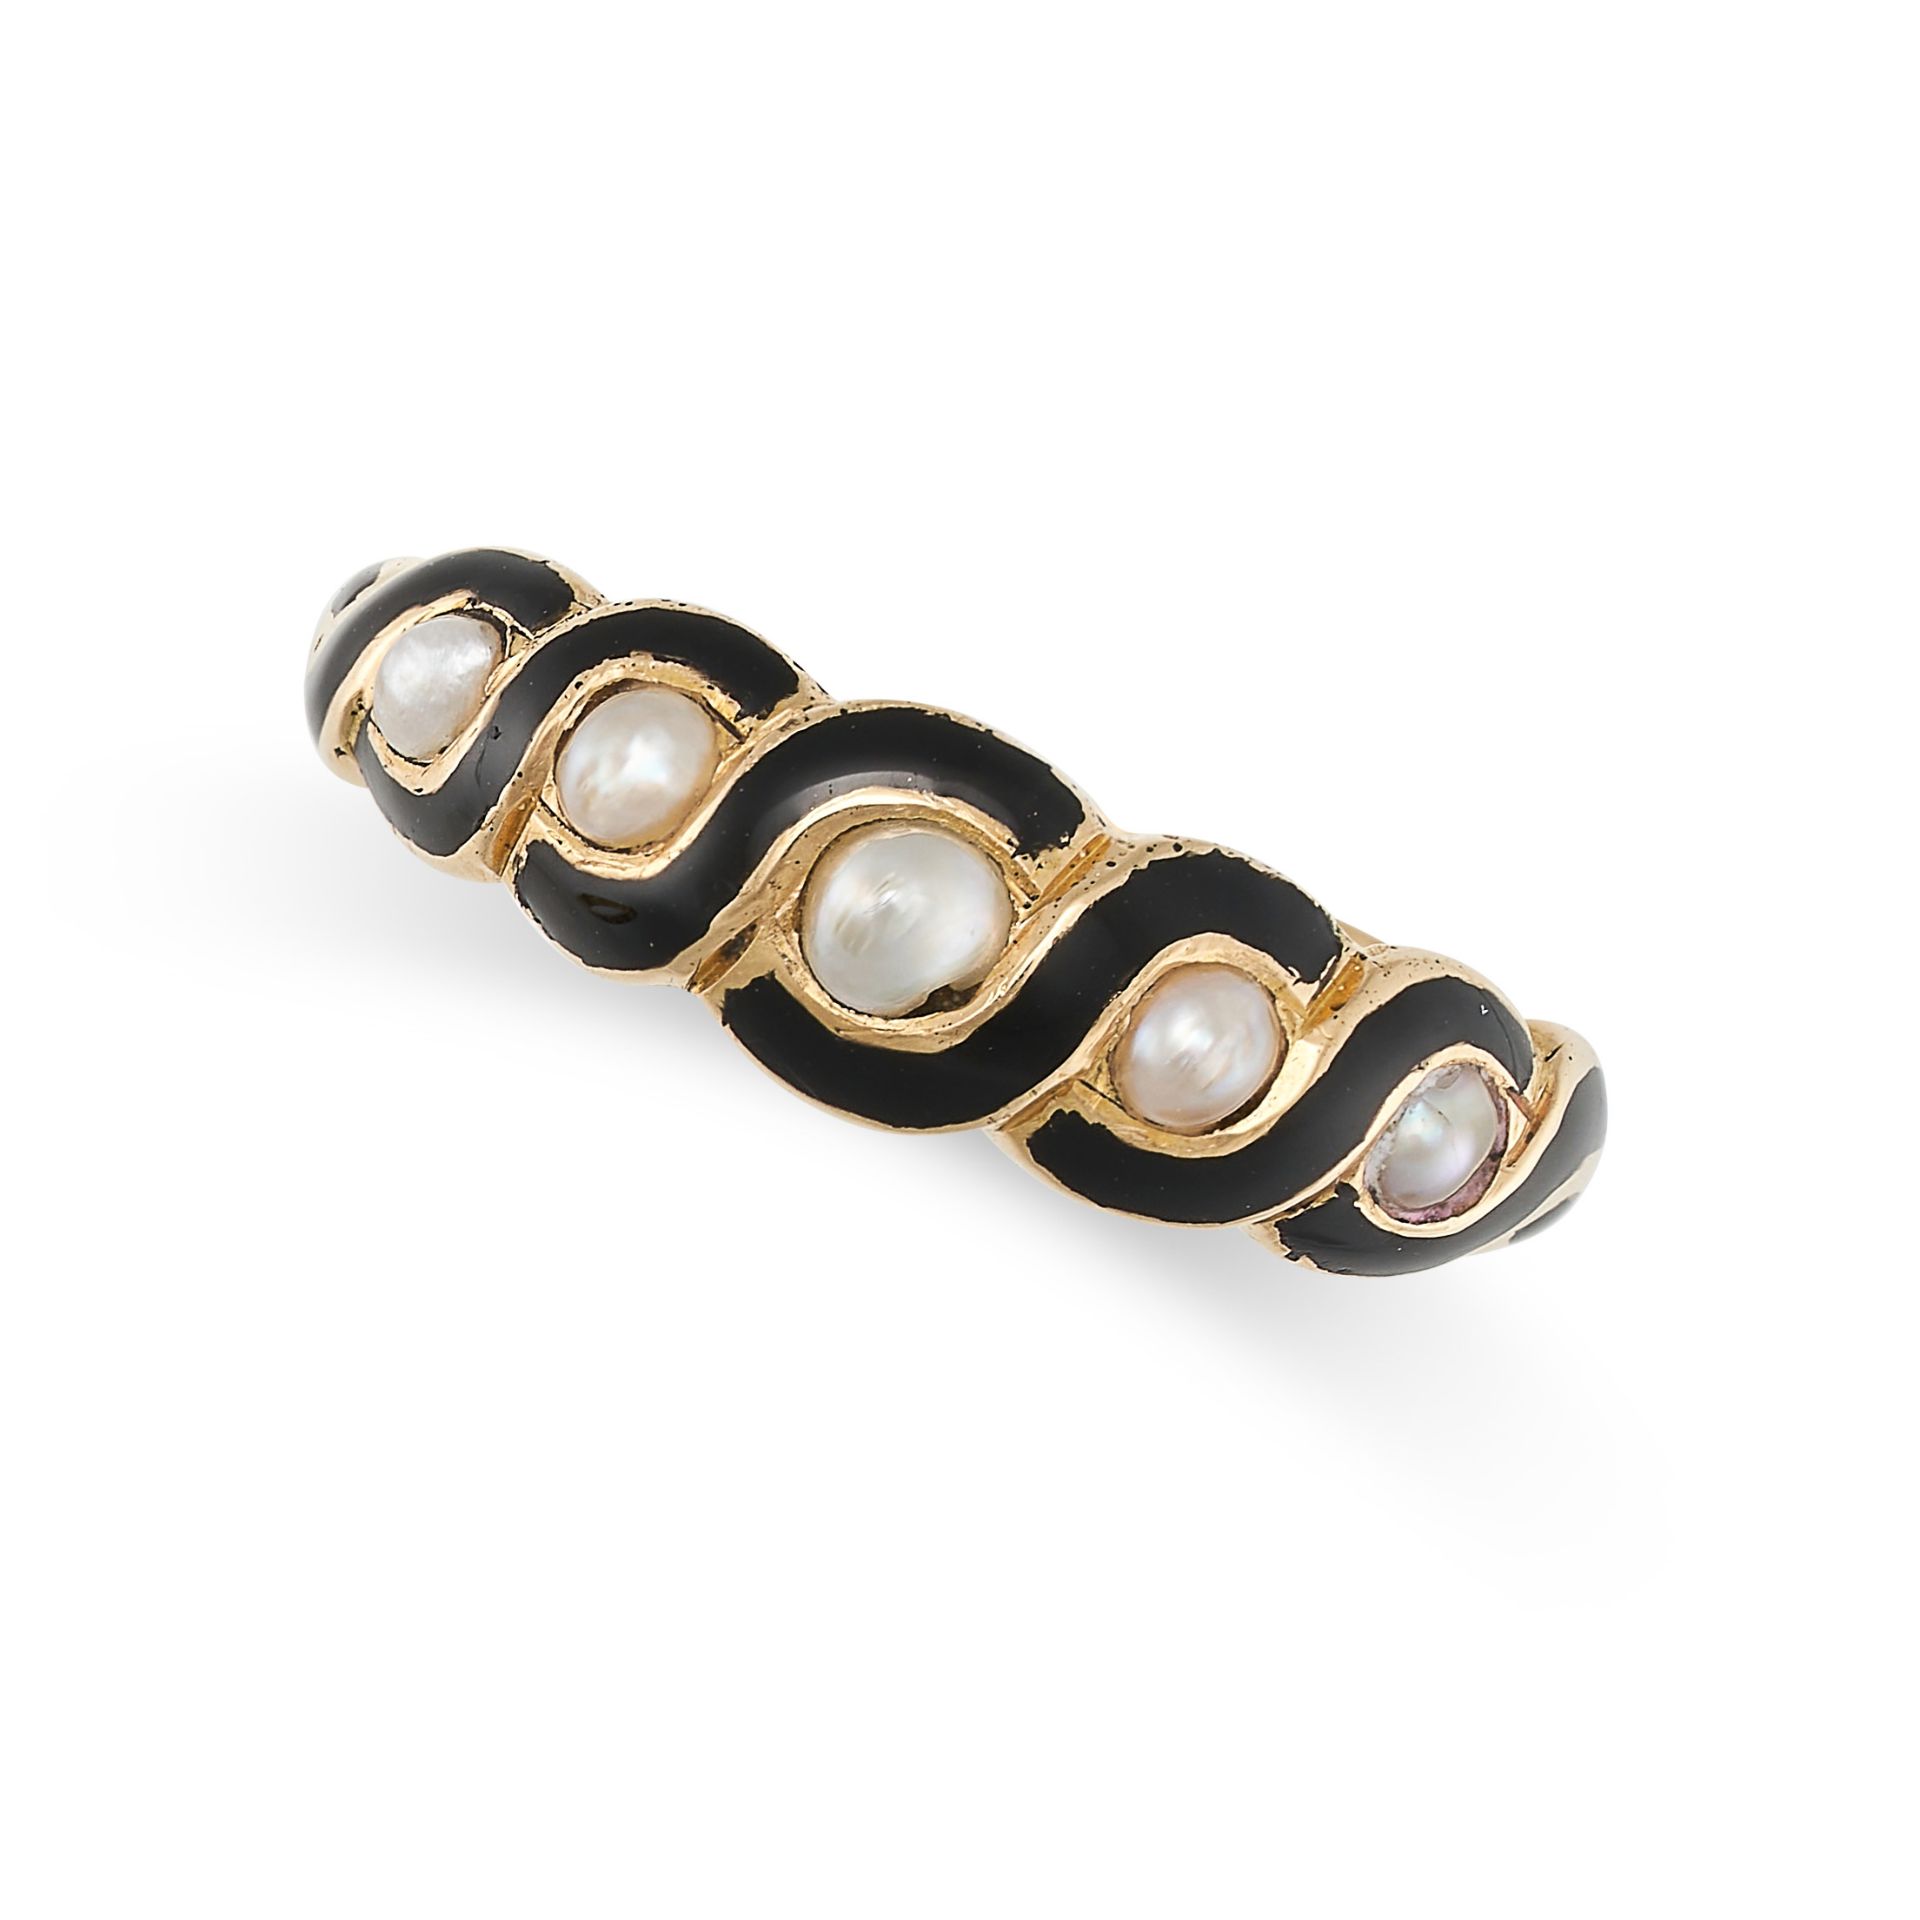 AN ANTIQUE PEARL AND ENAMEL RING in yellow gold, set with five pearls accented by black enamel, t...